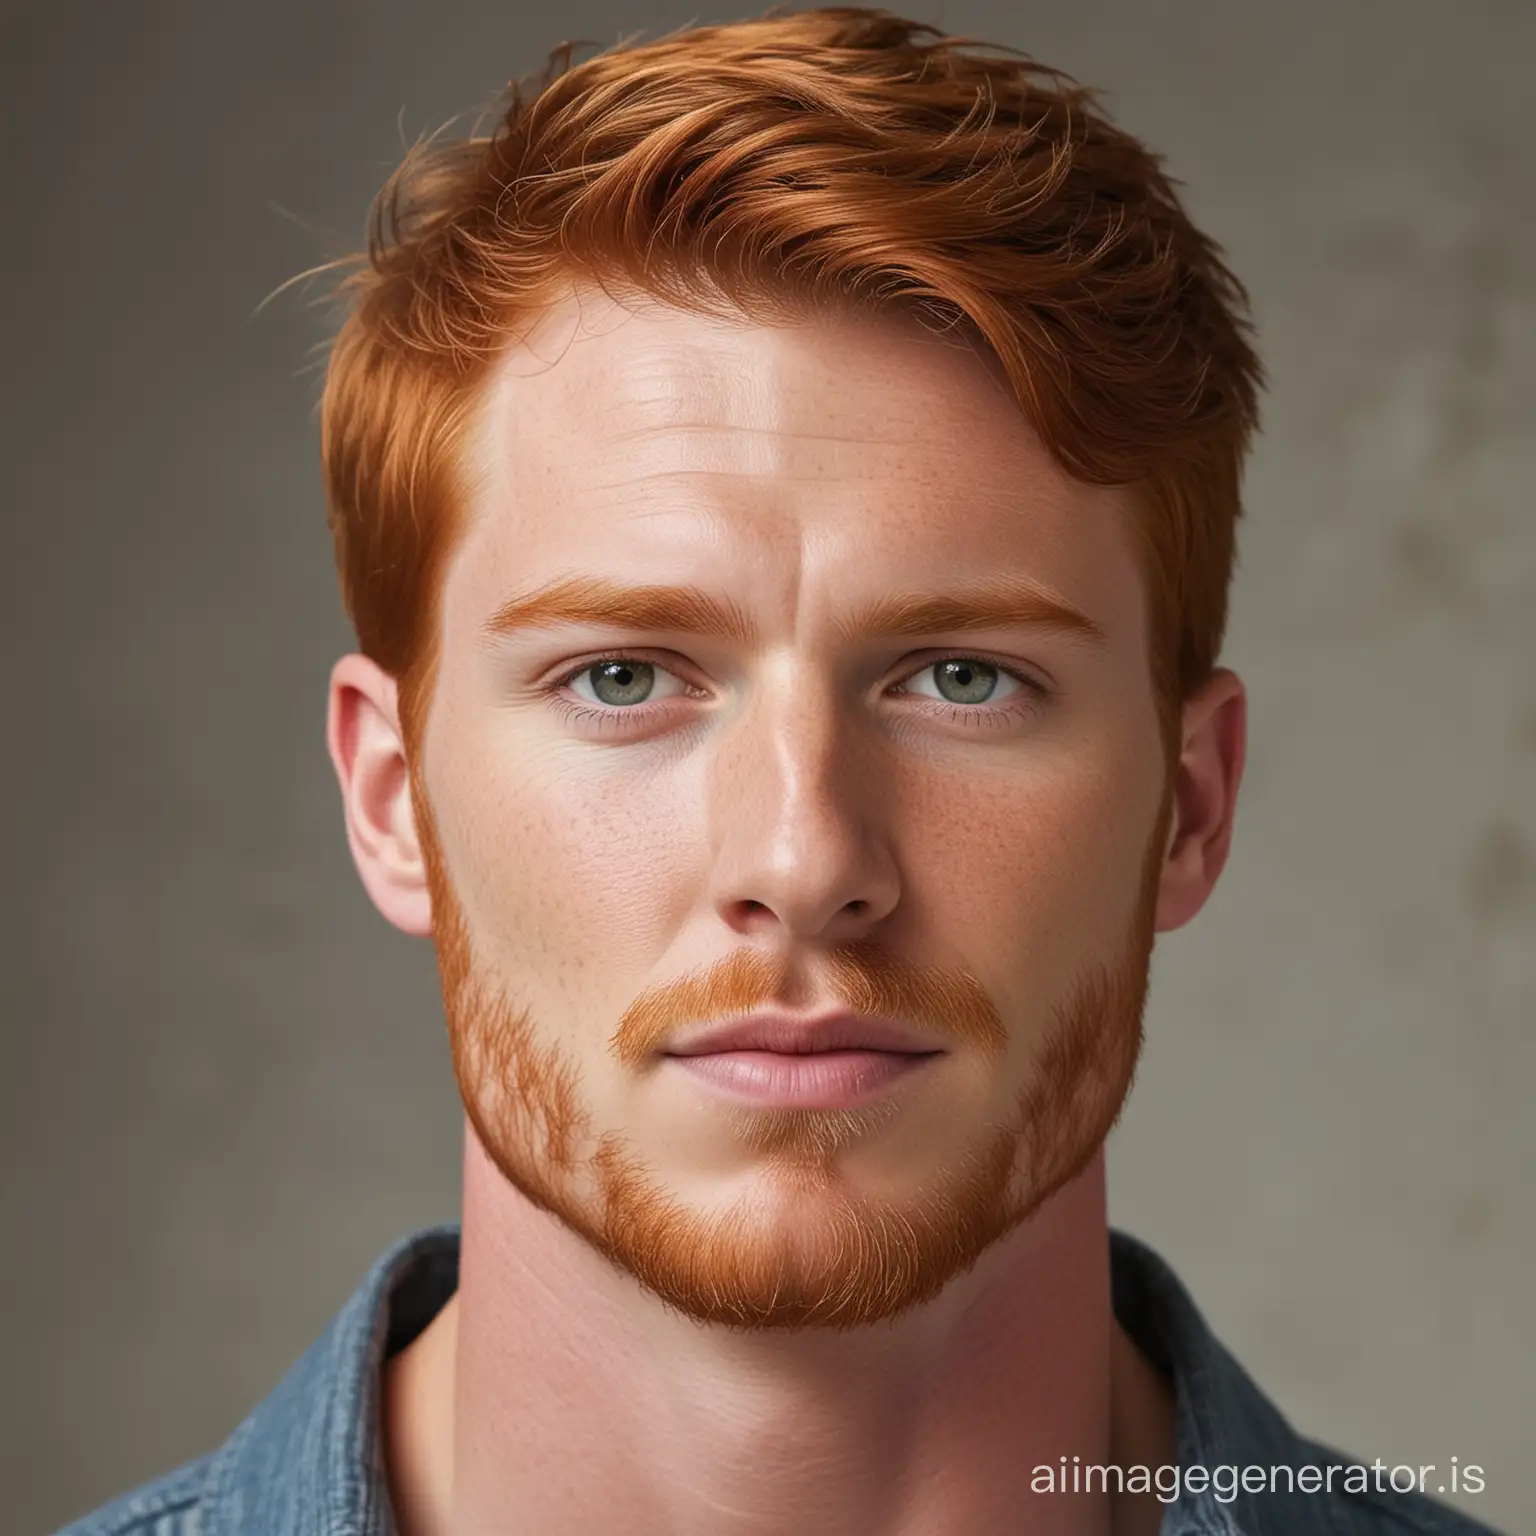 Handsome redheaded male without a beard